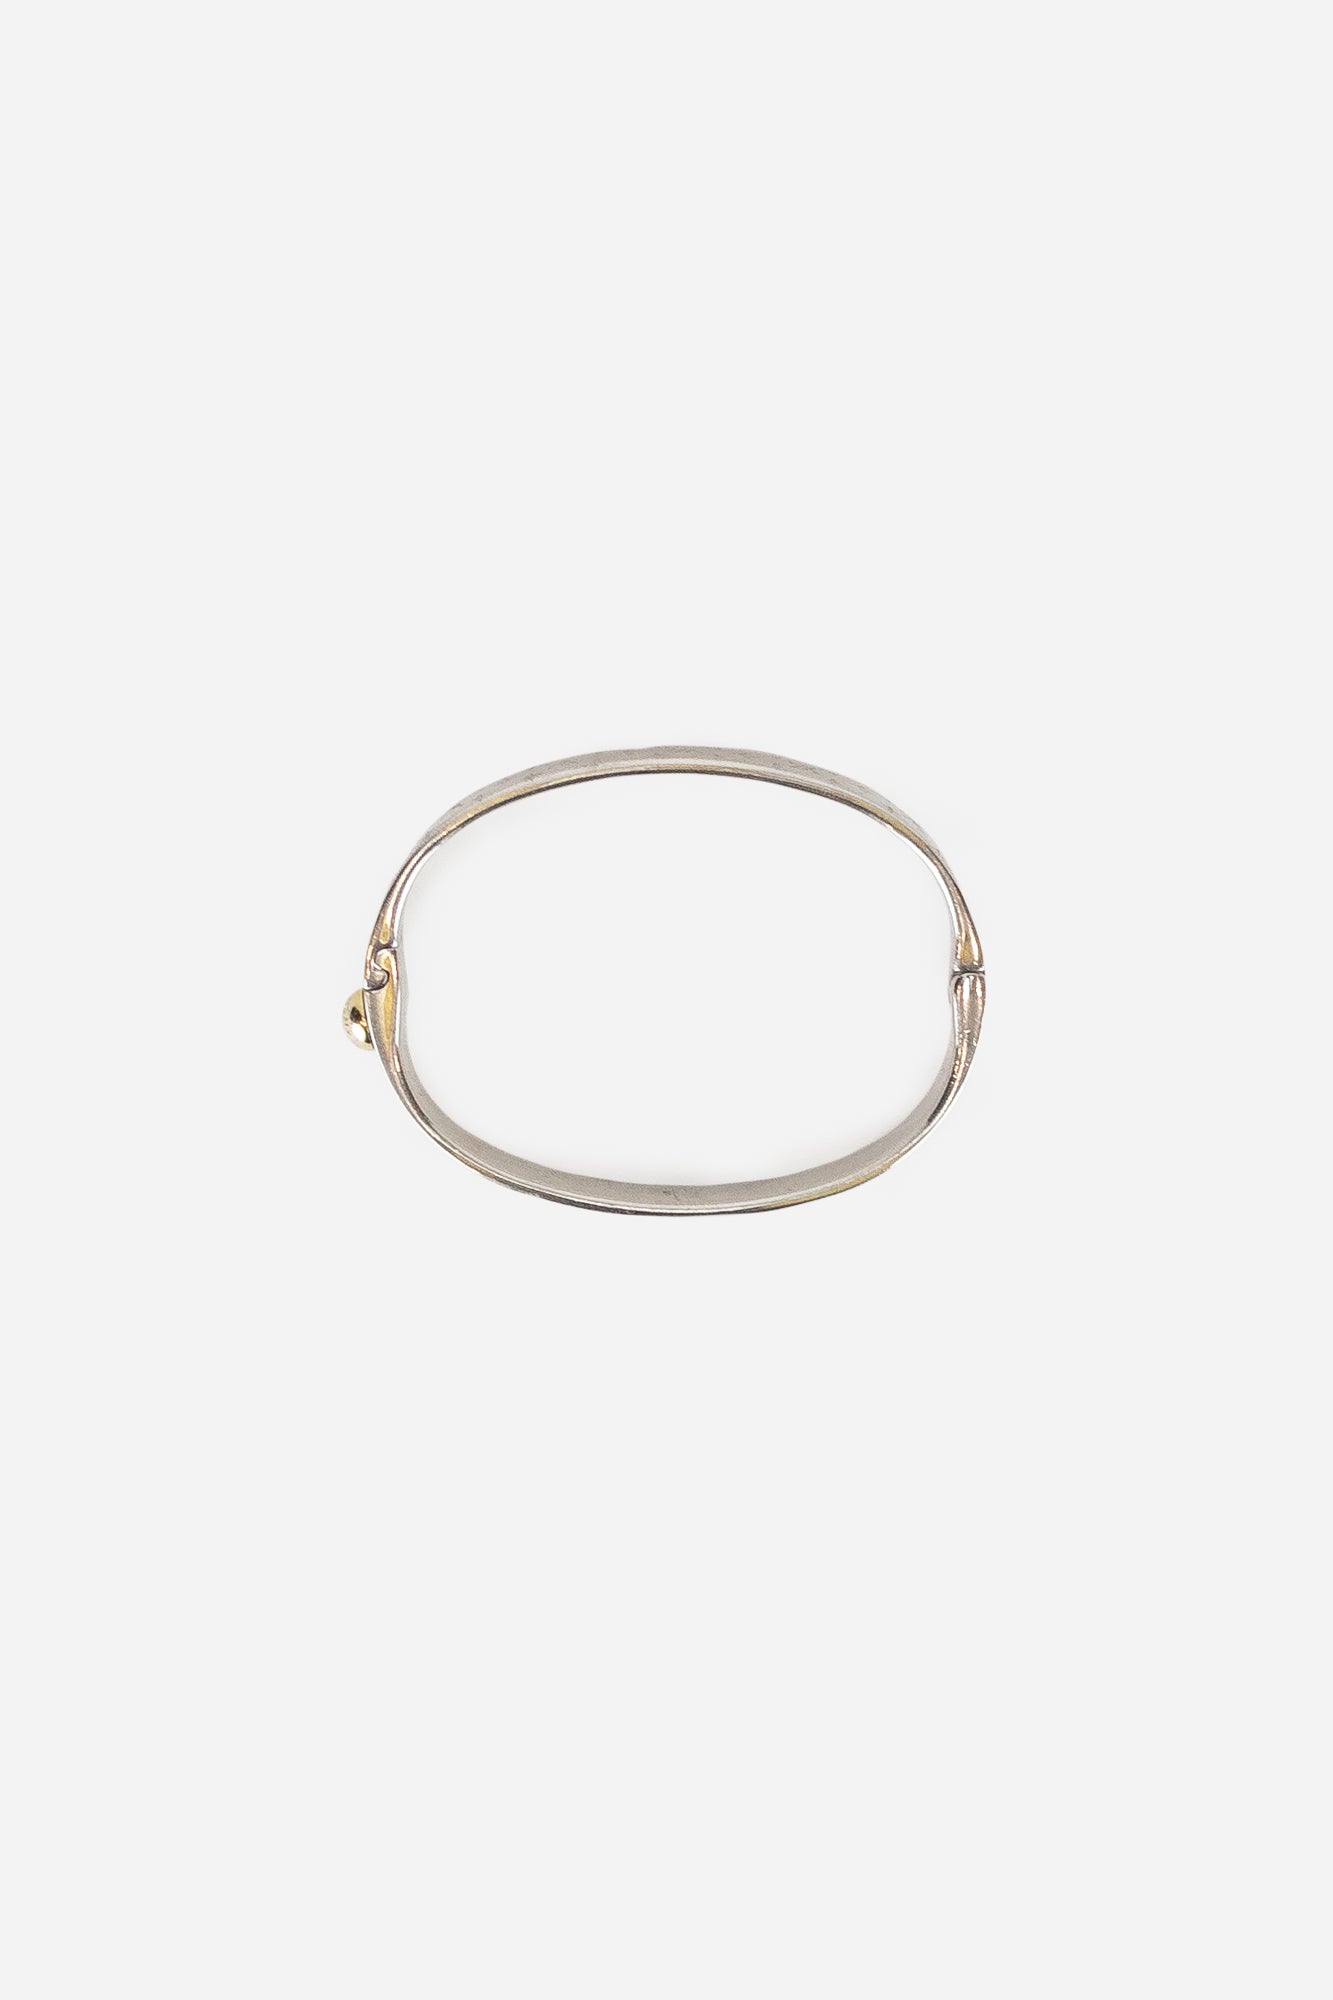 Chunky Silver Monogram Cuff Bracelet With Gold Side Detail